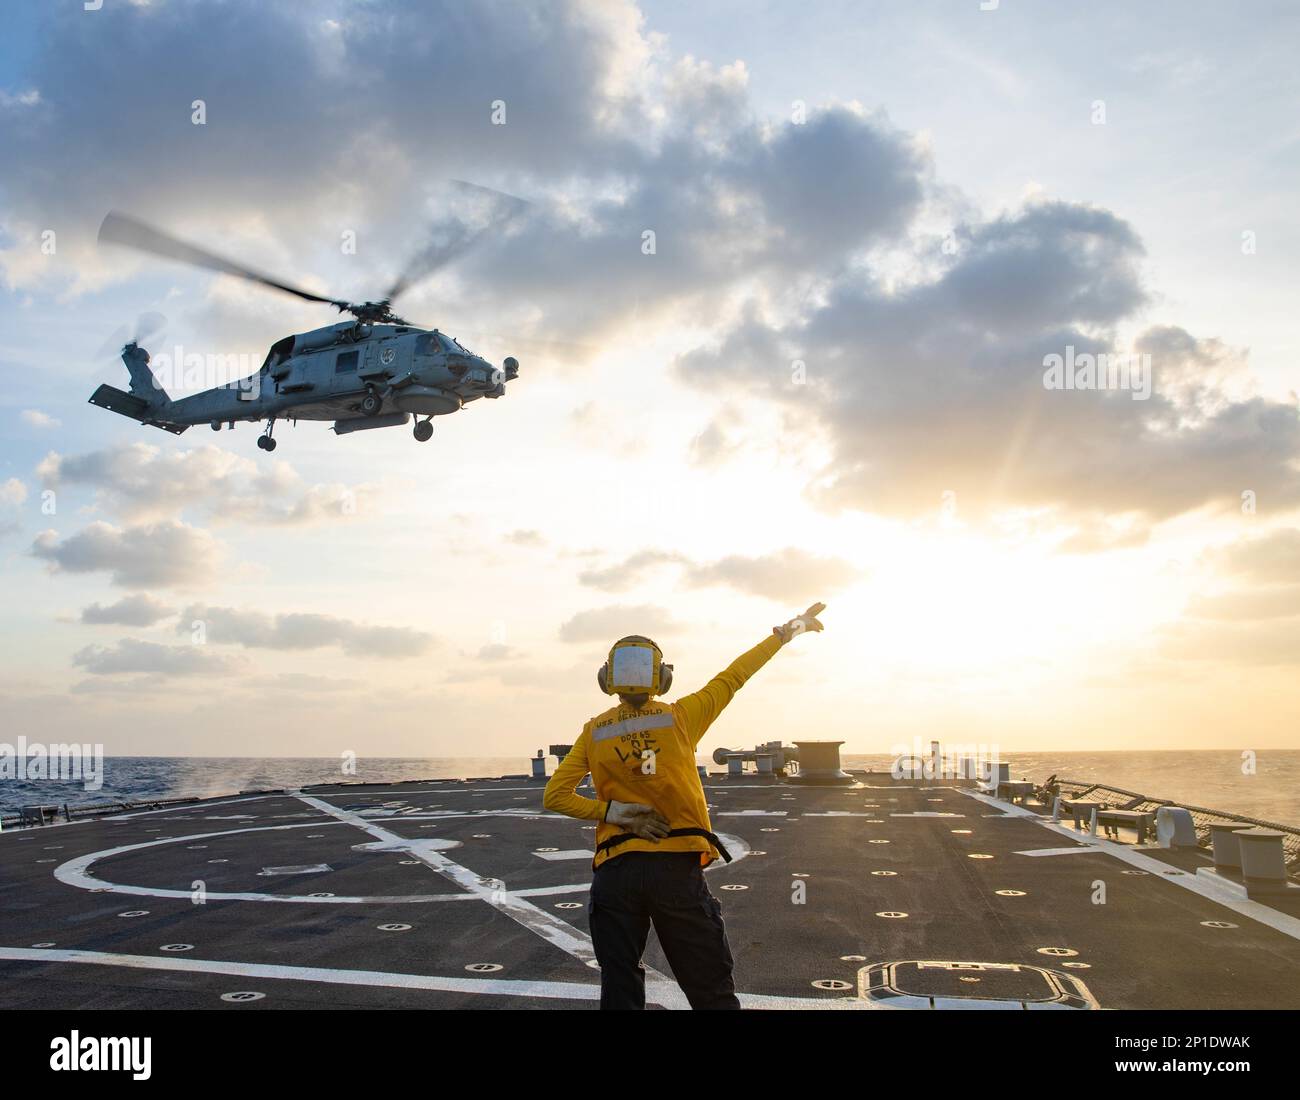 PHILIPPINE SEA (Jan. 21, 2023) Boatswains’s Mate 2nd Class Sarah Johnson, from Centura, Wisconsin, salutes an MH-60S during flight quarters aboard Arleigh Burke-class guided-missile destroyer USS Benfold (DDG 65) in the Philippine sea, Jan. 21. Benfold is assigned to Commander, Task Force (CTF) 71/Destroyer Squadron (DESRON) 15, the Navy’s largest forward-deployed DESRON and the U.S. 7th Fleet’s principal surface force. (U.S. Navy photo by Mass Communication Specialist 3rd Class RuKiyah Mack). Stock Photo